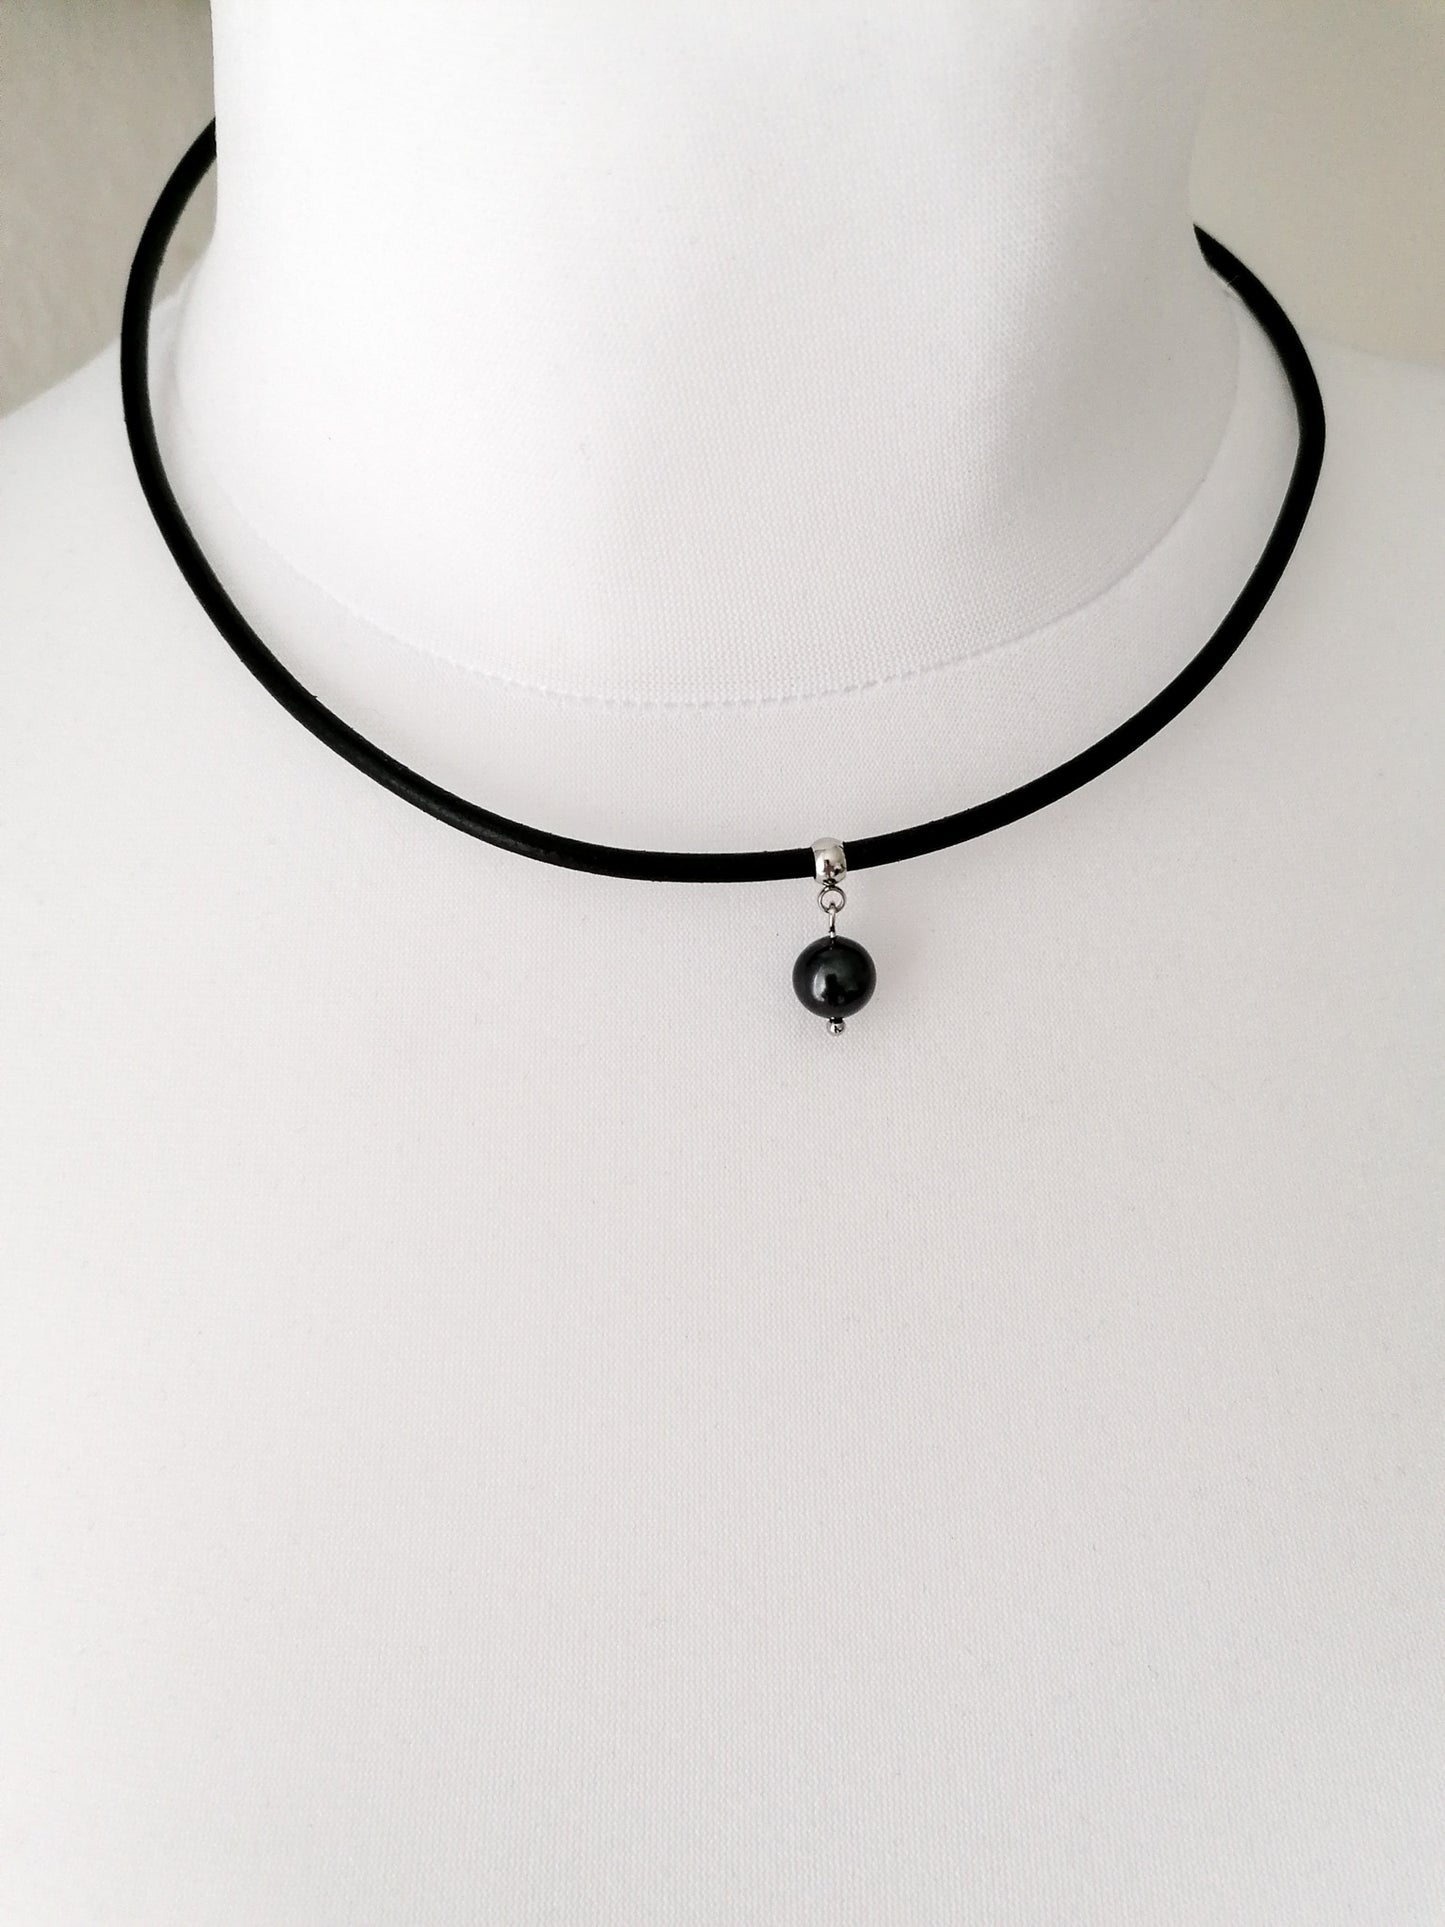 Black pearl leather necklace